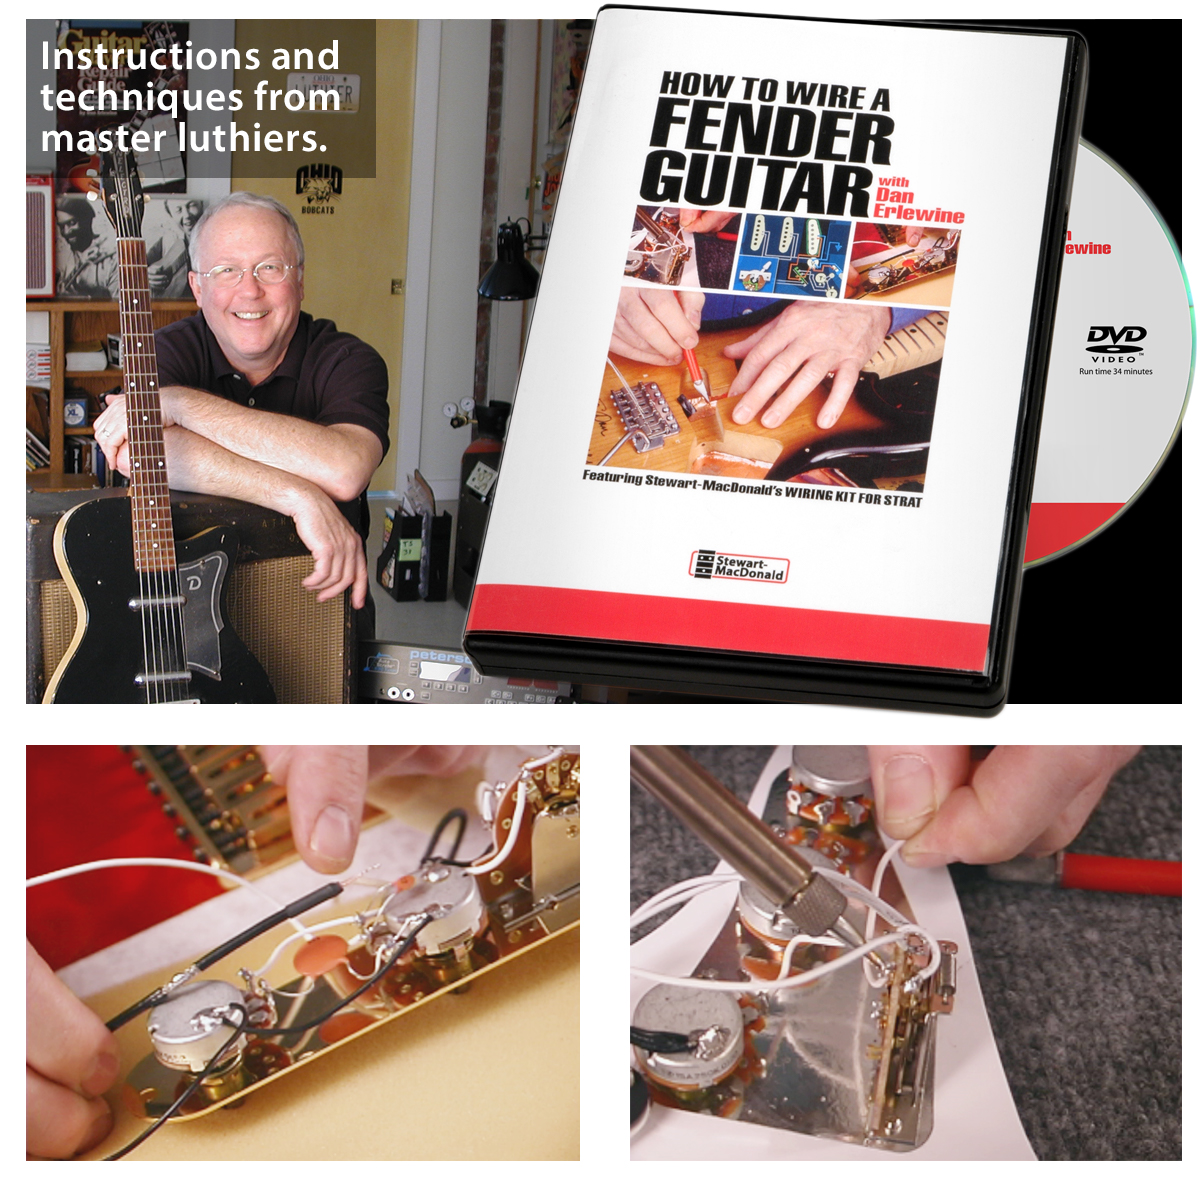 How to Wire a Fender Guitar DVD